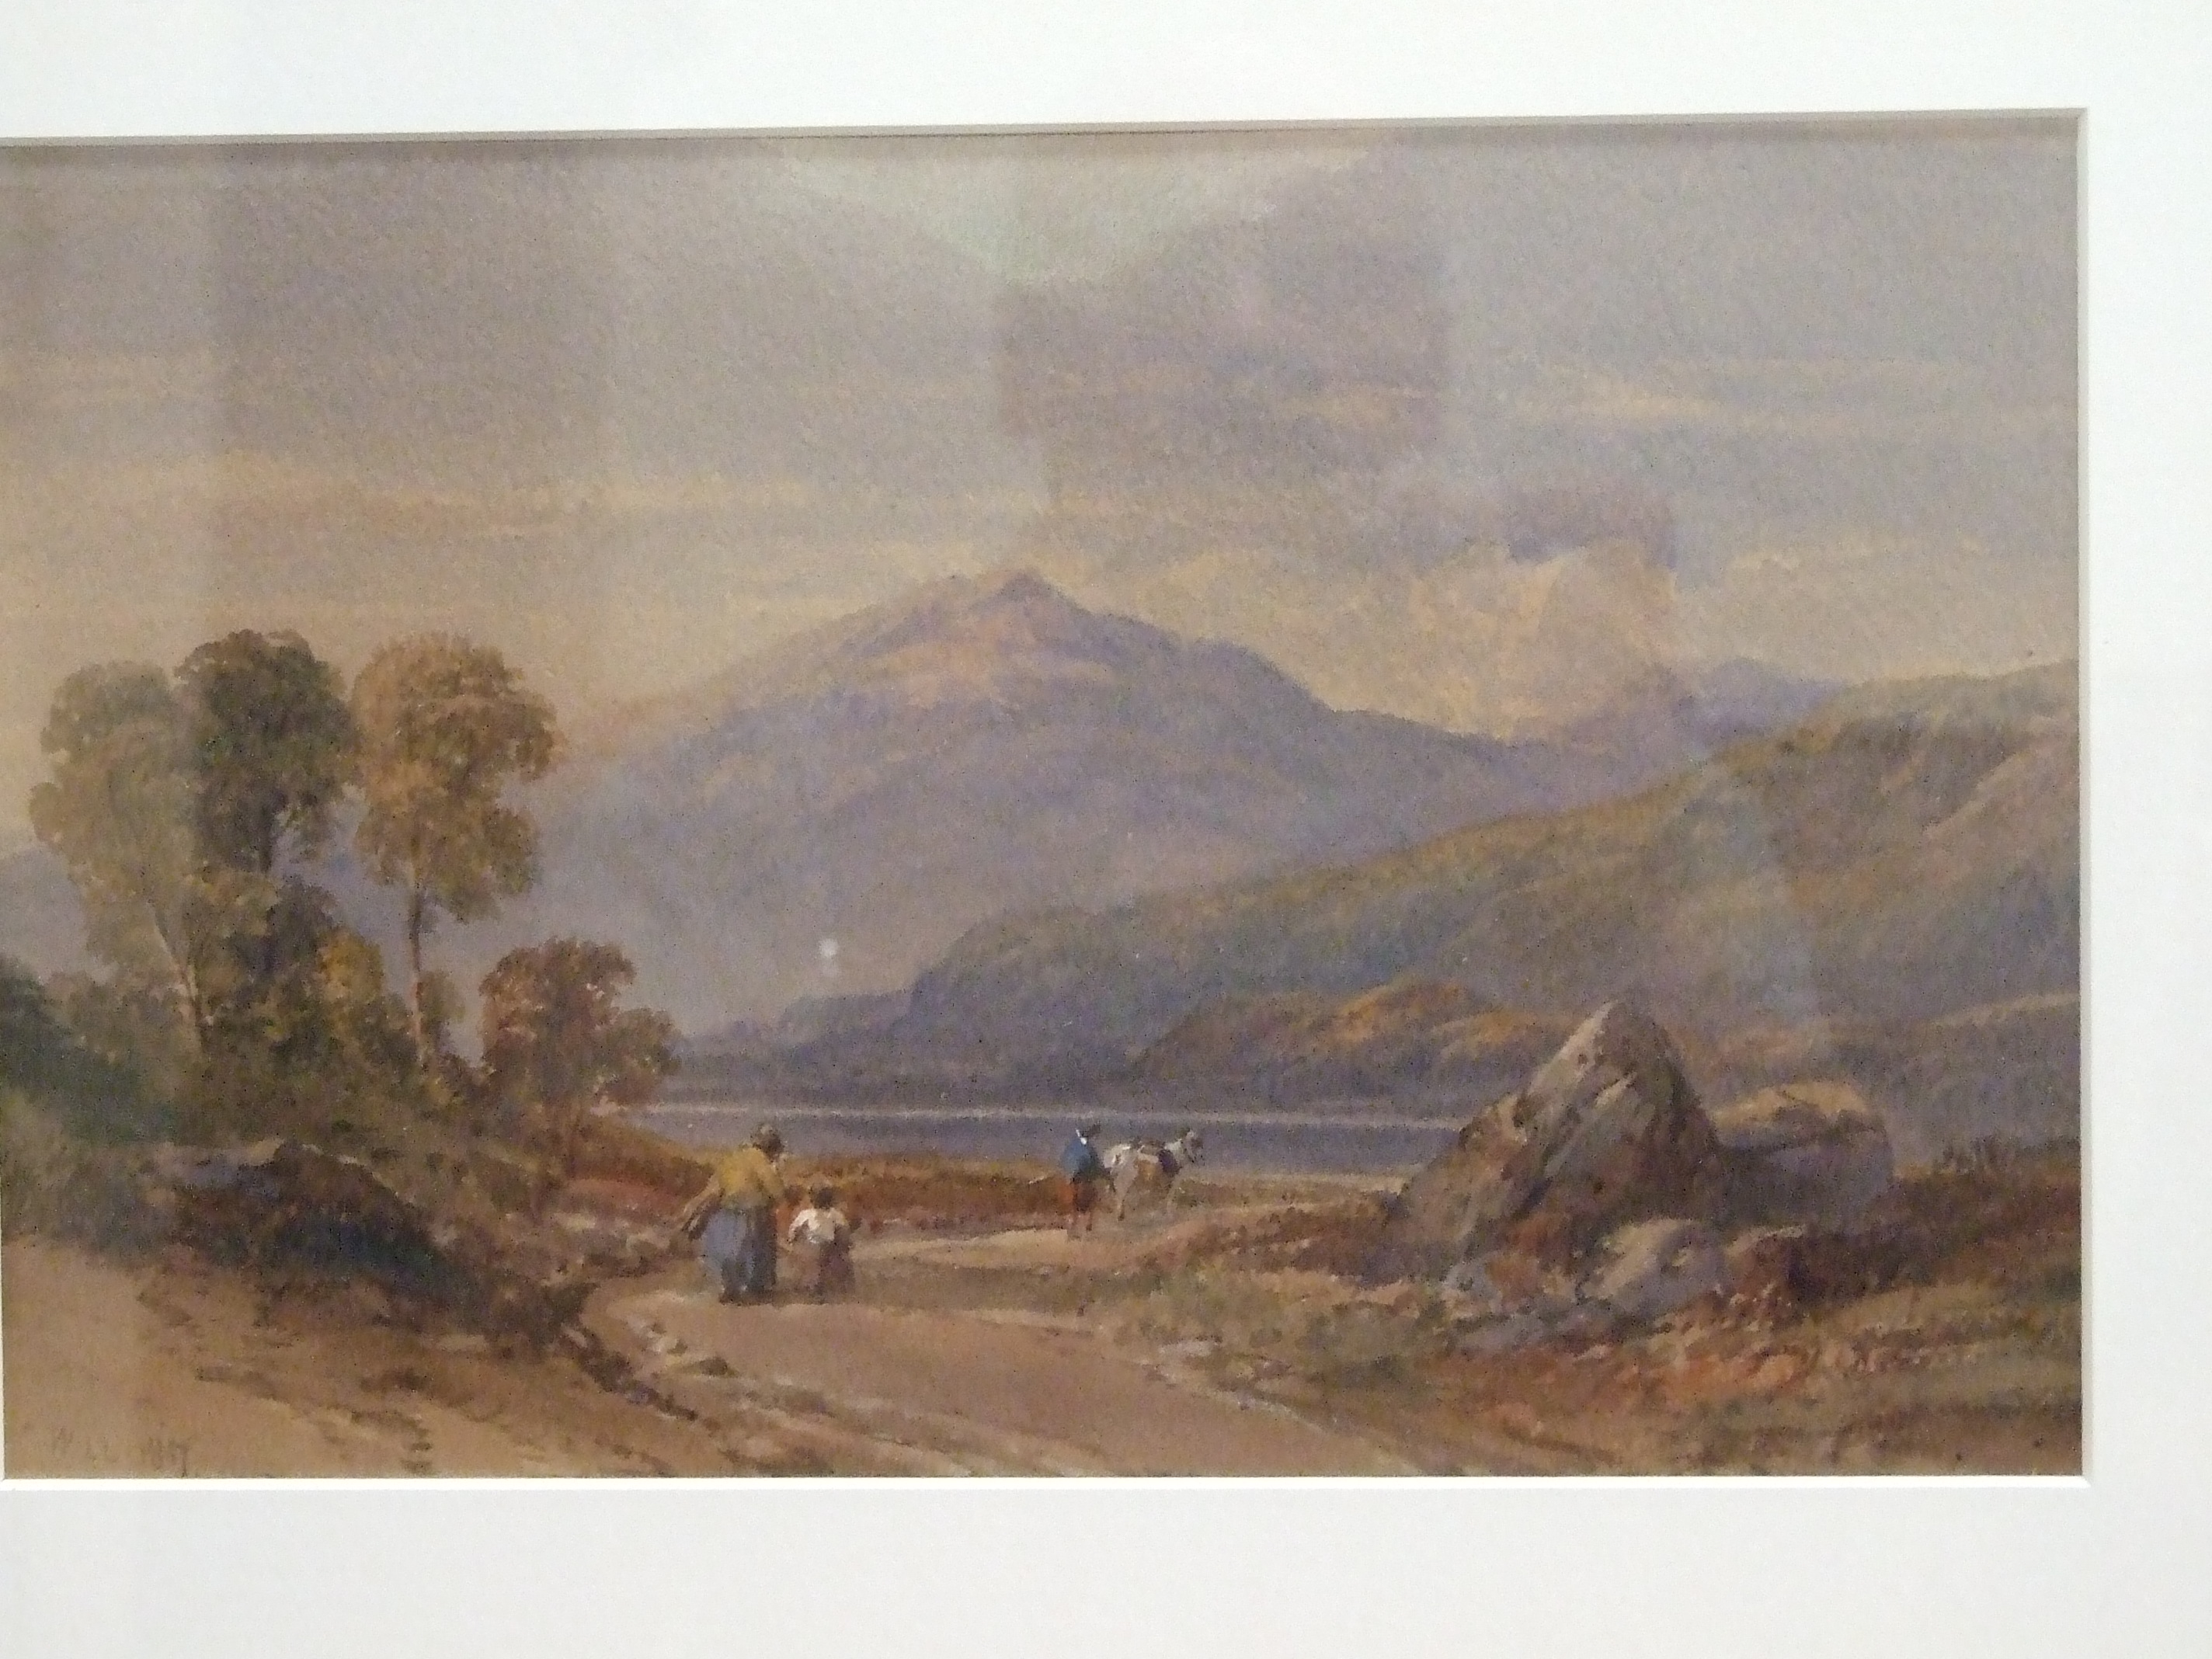 William Leighton Leitch BEN LAWERS, SCOTLAND Initialled watercolour, dated 1857, 18.5 x 28.5cm,